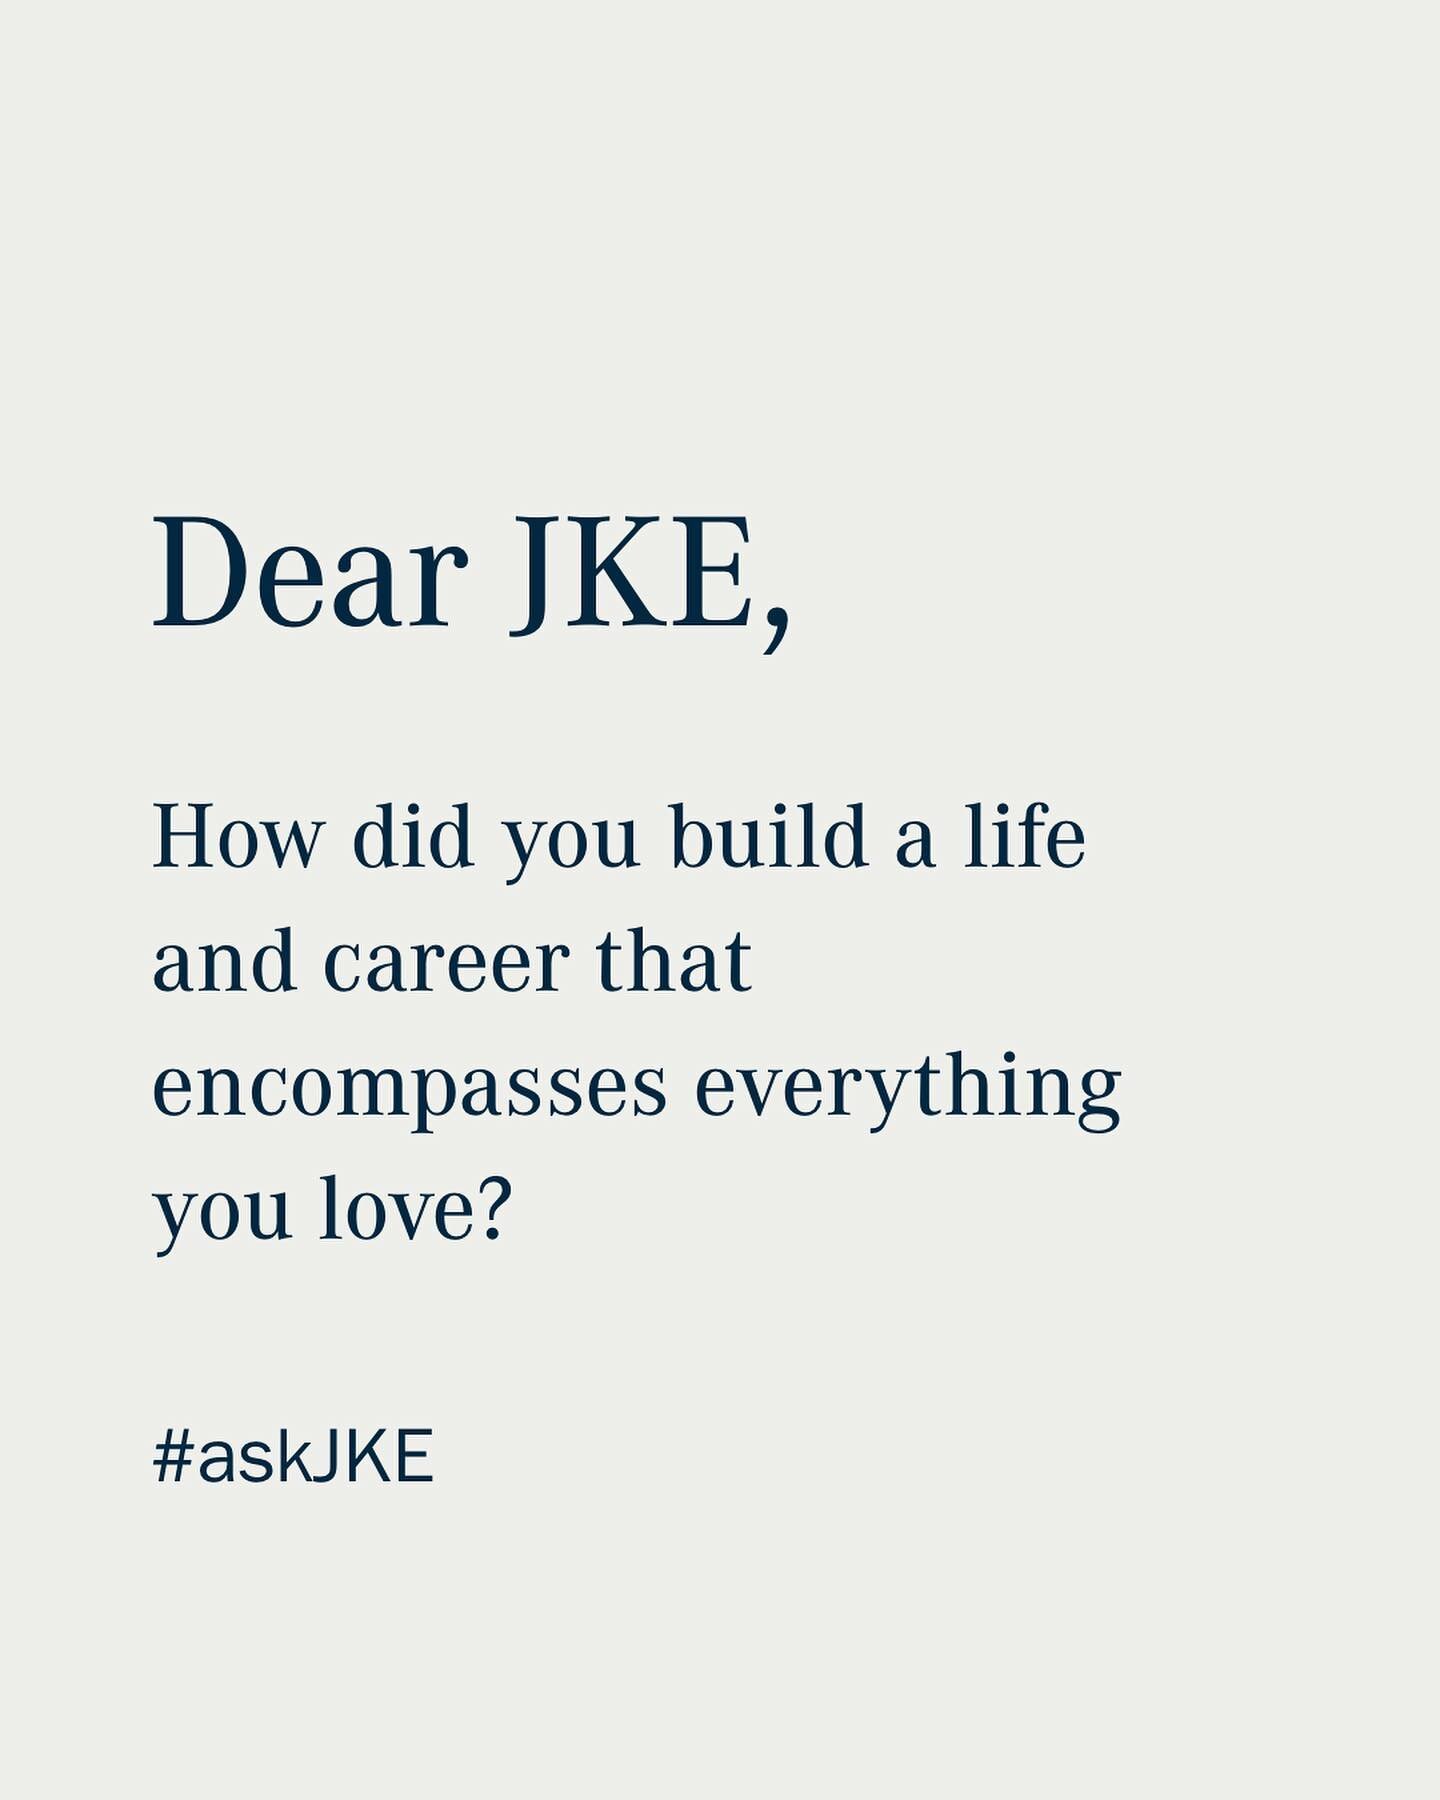 I hope this helps, whoever you may be. 

My latest #askJKE advice column for @ournaturalhabitat. Link in bio to read!

To submit an anonymous Q, link in bio or head to www.vitruvi.ca